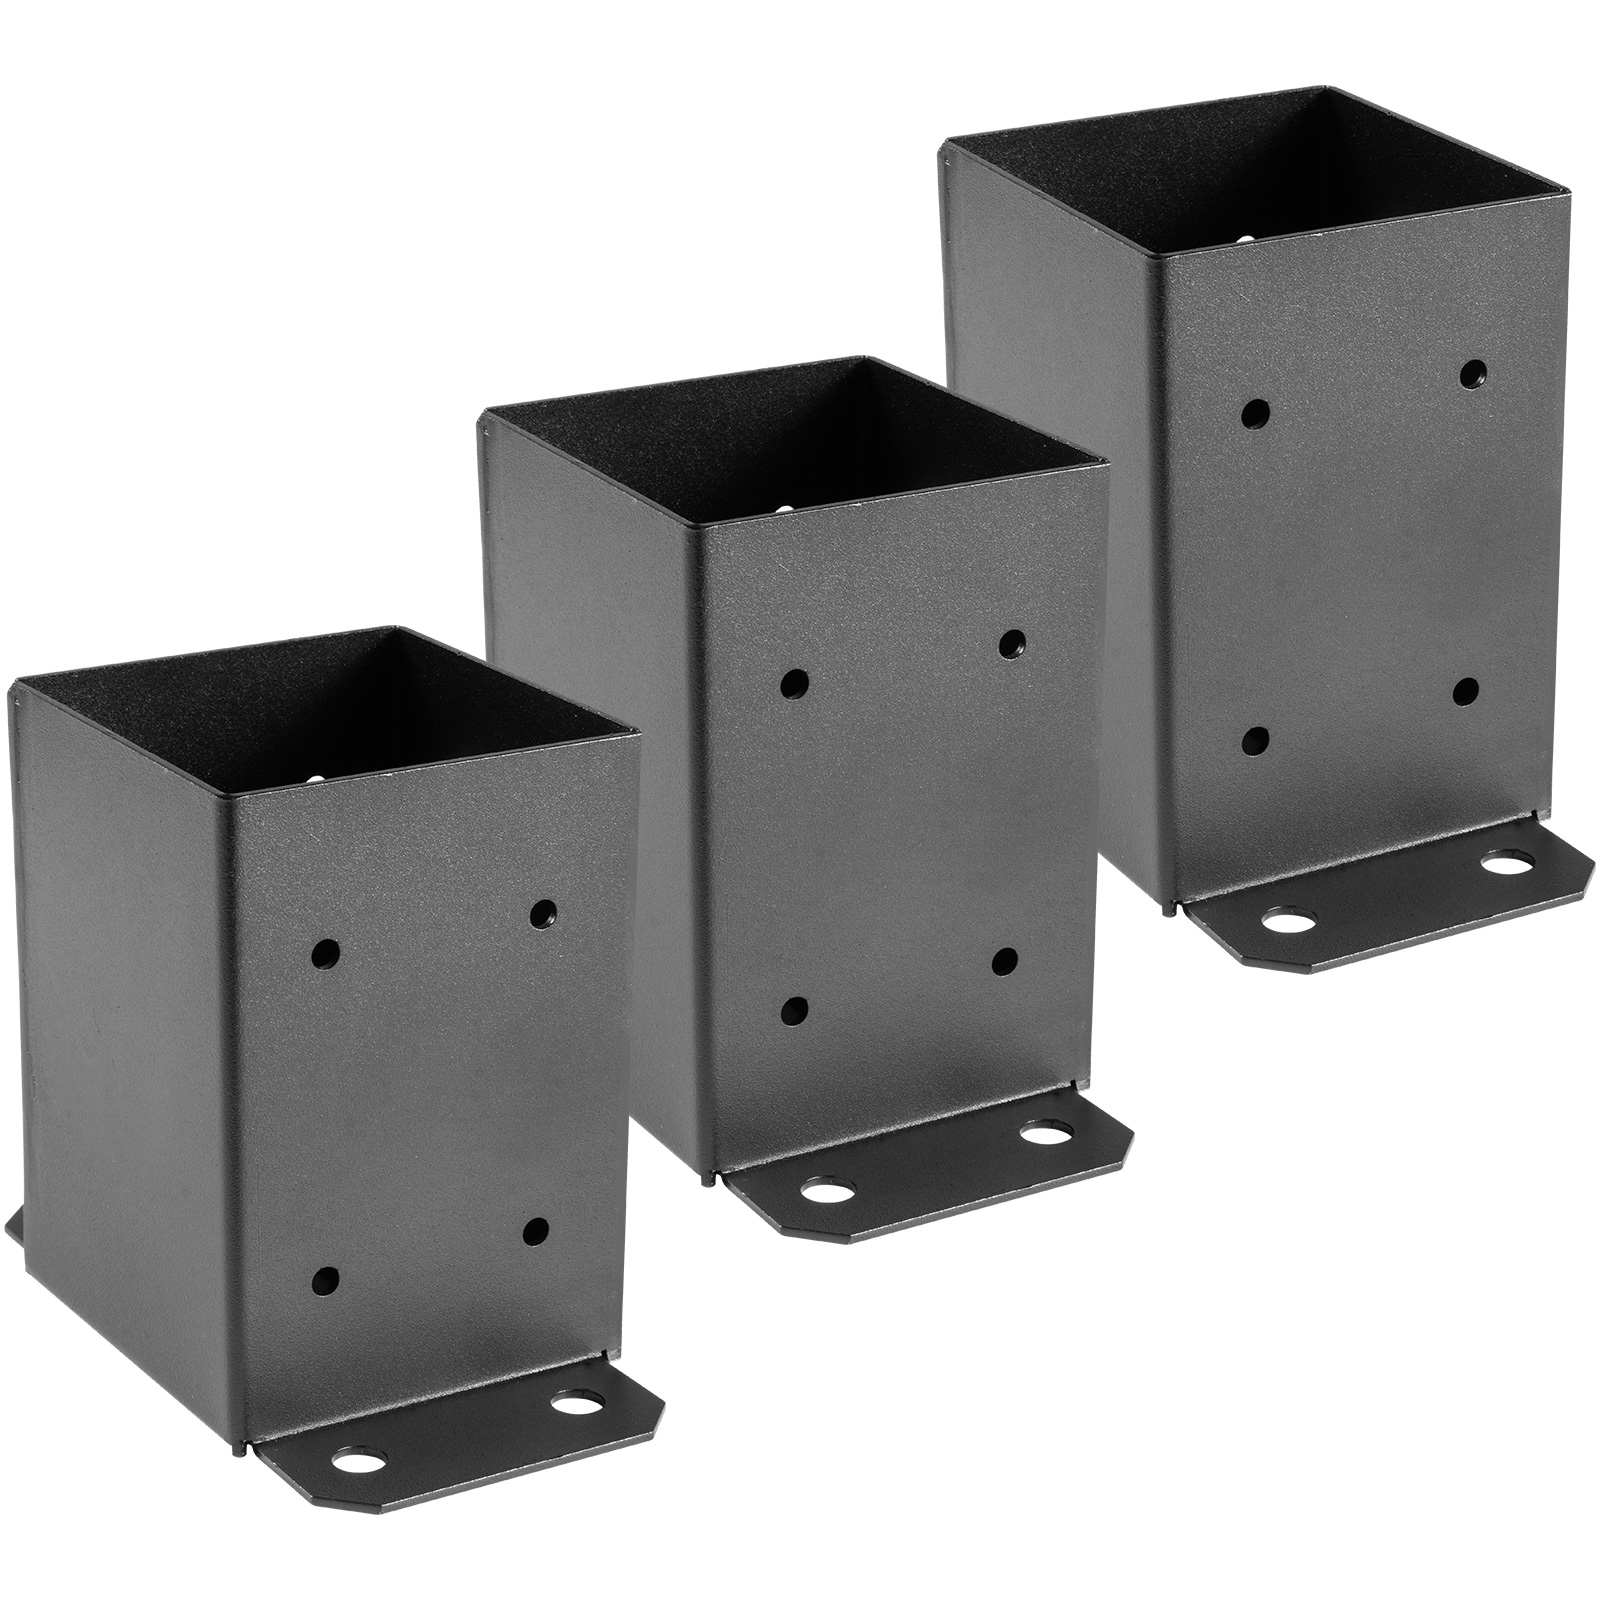 Steel Bench Block 4x4 Inch - Pack of 1: Wire Jewelry